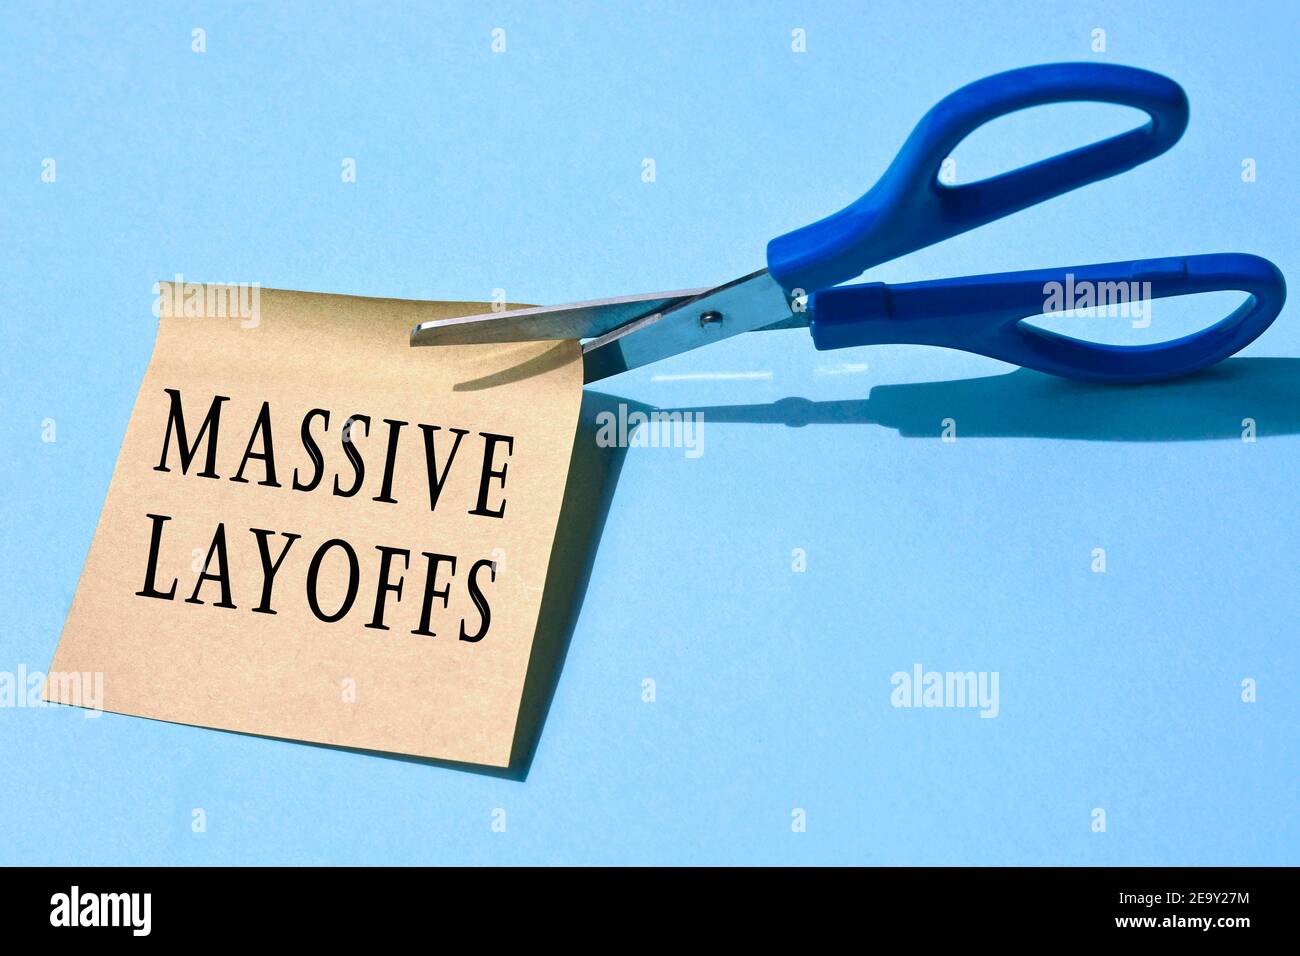 Scissors that cut yellow notepad with massive layoffs text on a blue background. Business concepts Stock Photo